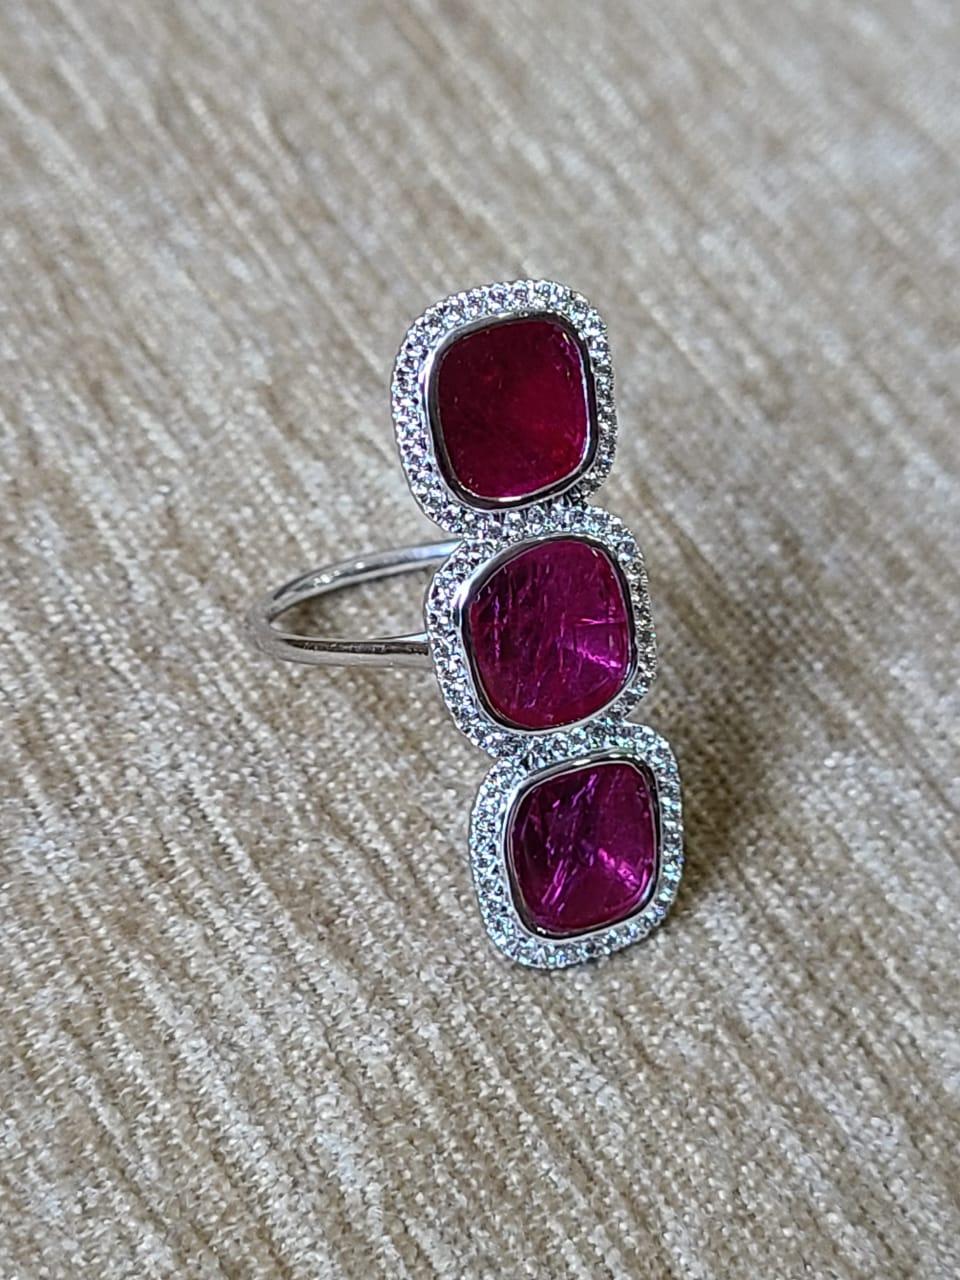 A very chic and one of a kind, Ruby Cocktail Ring set in 18K Gold & Diamonds. The Ruby is of Mozambique origin and weighs 4.29 carats. The diamond weight is 0.42 carats. The ring is 6.50 US size and can be changed on request. The dimensions of the